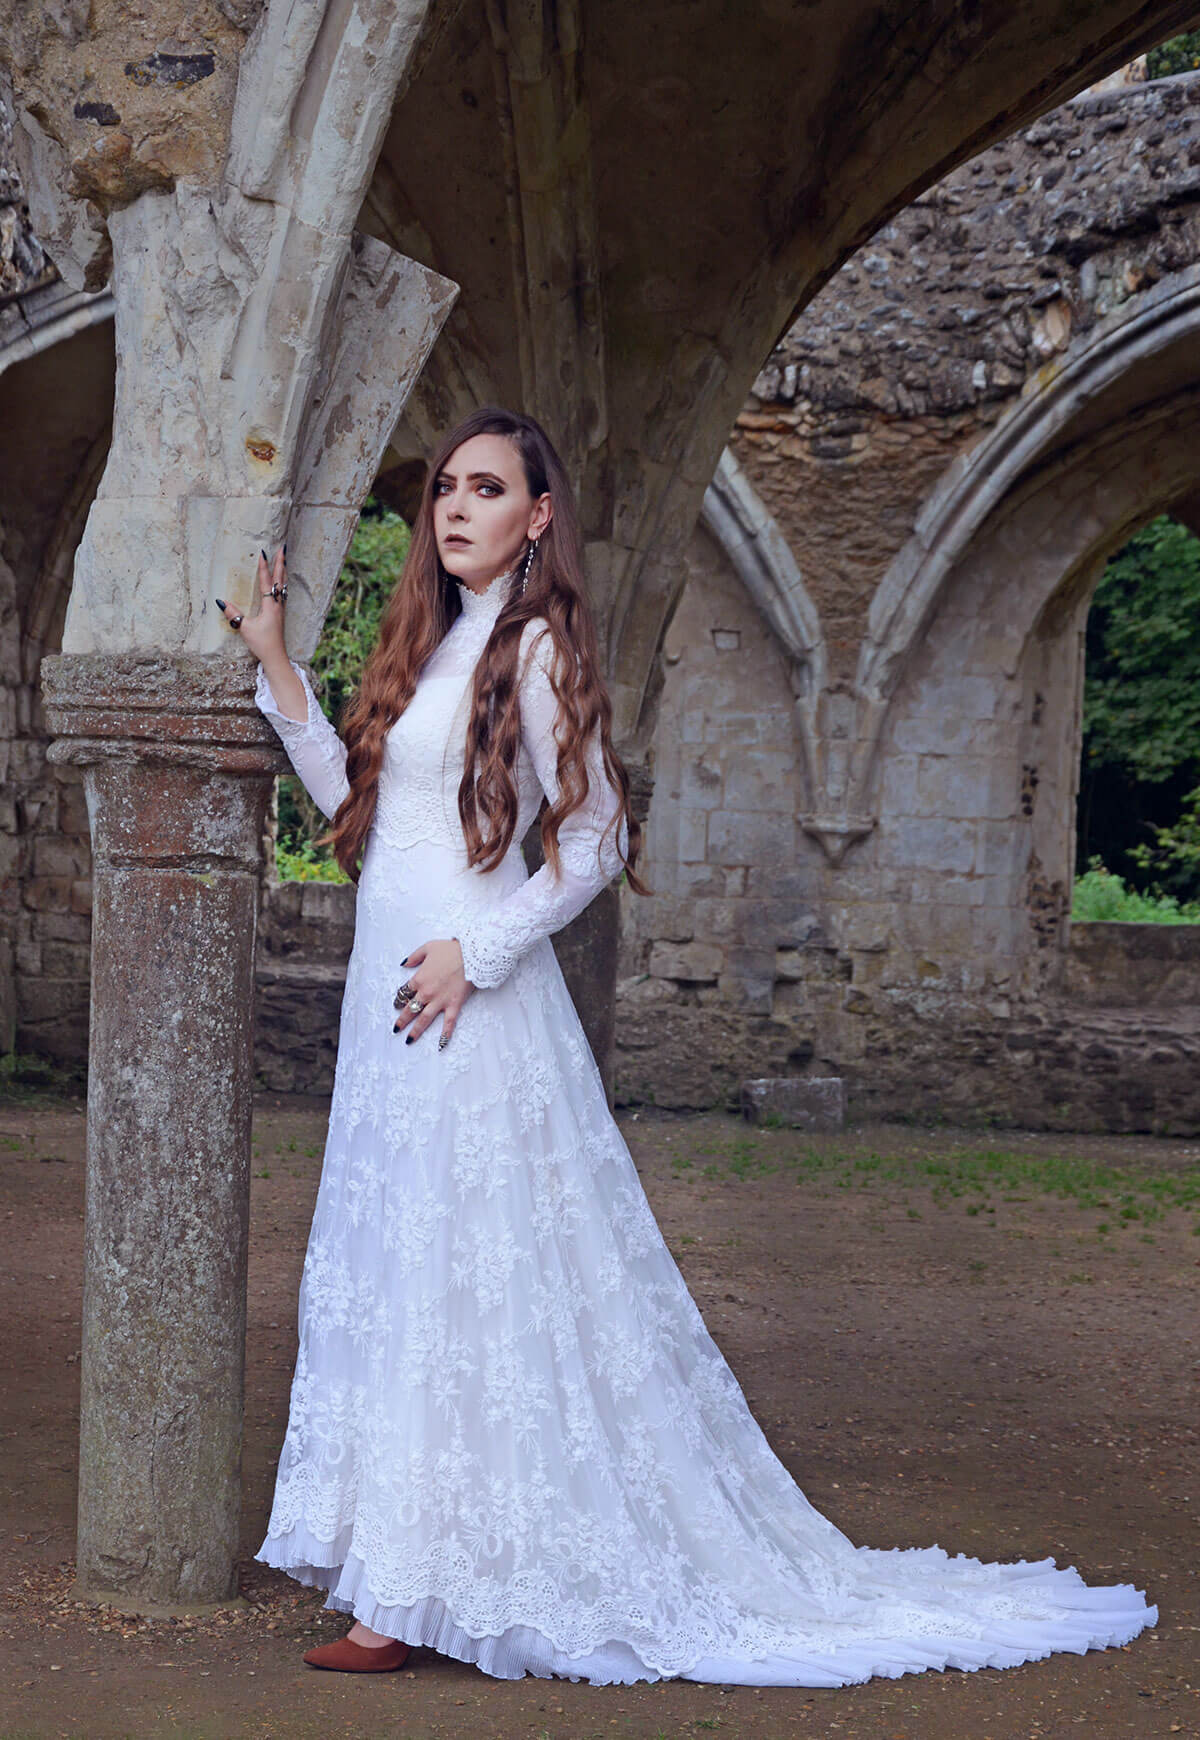 Jewellery Influencer in Silver Jewelery Gothic Ghost Look